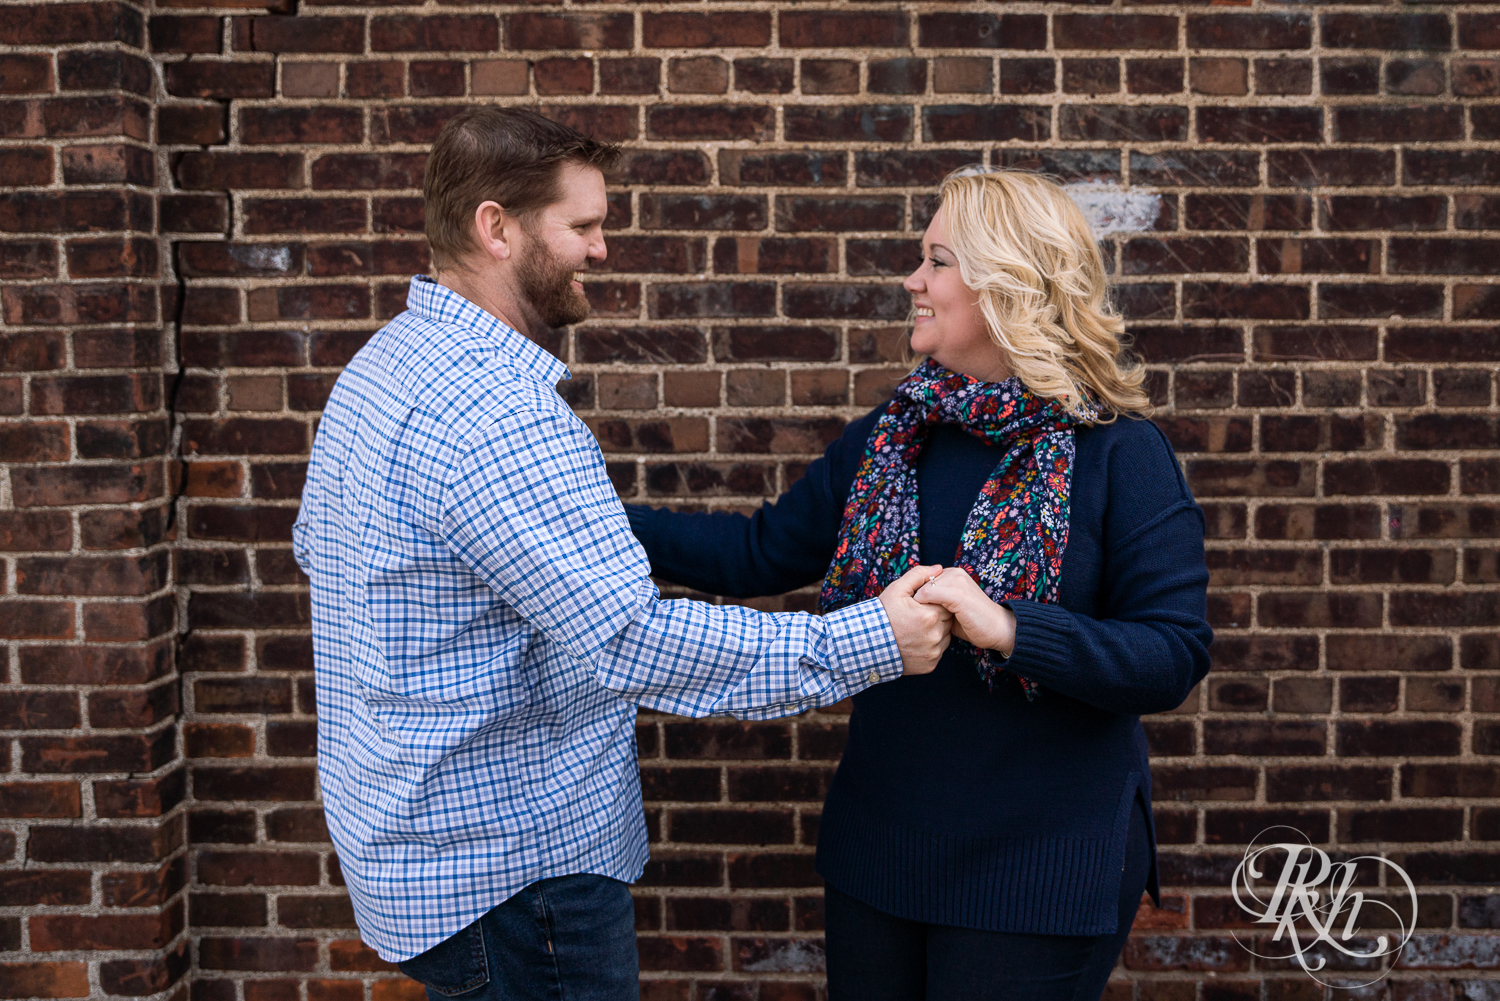 Blond woman and bearded man dance against brick wall in Stillwater, Minnesota.